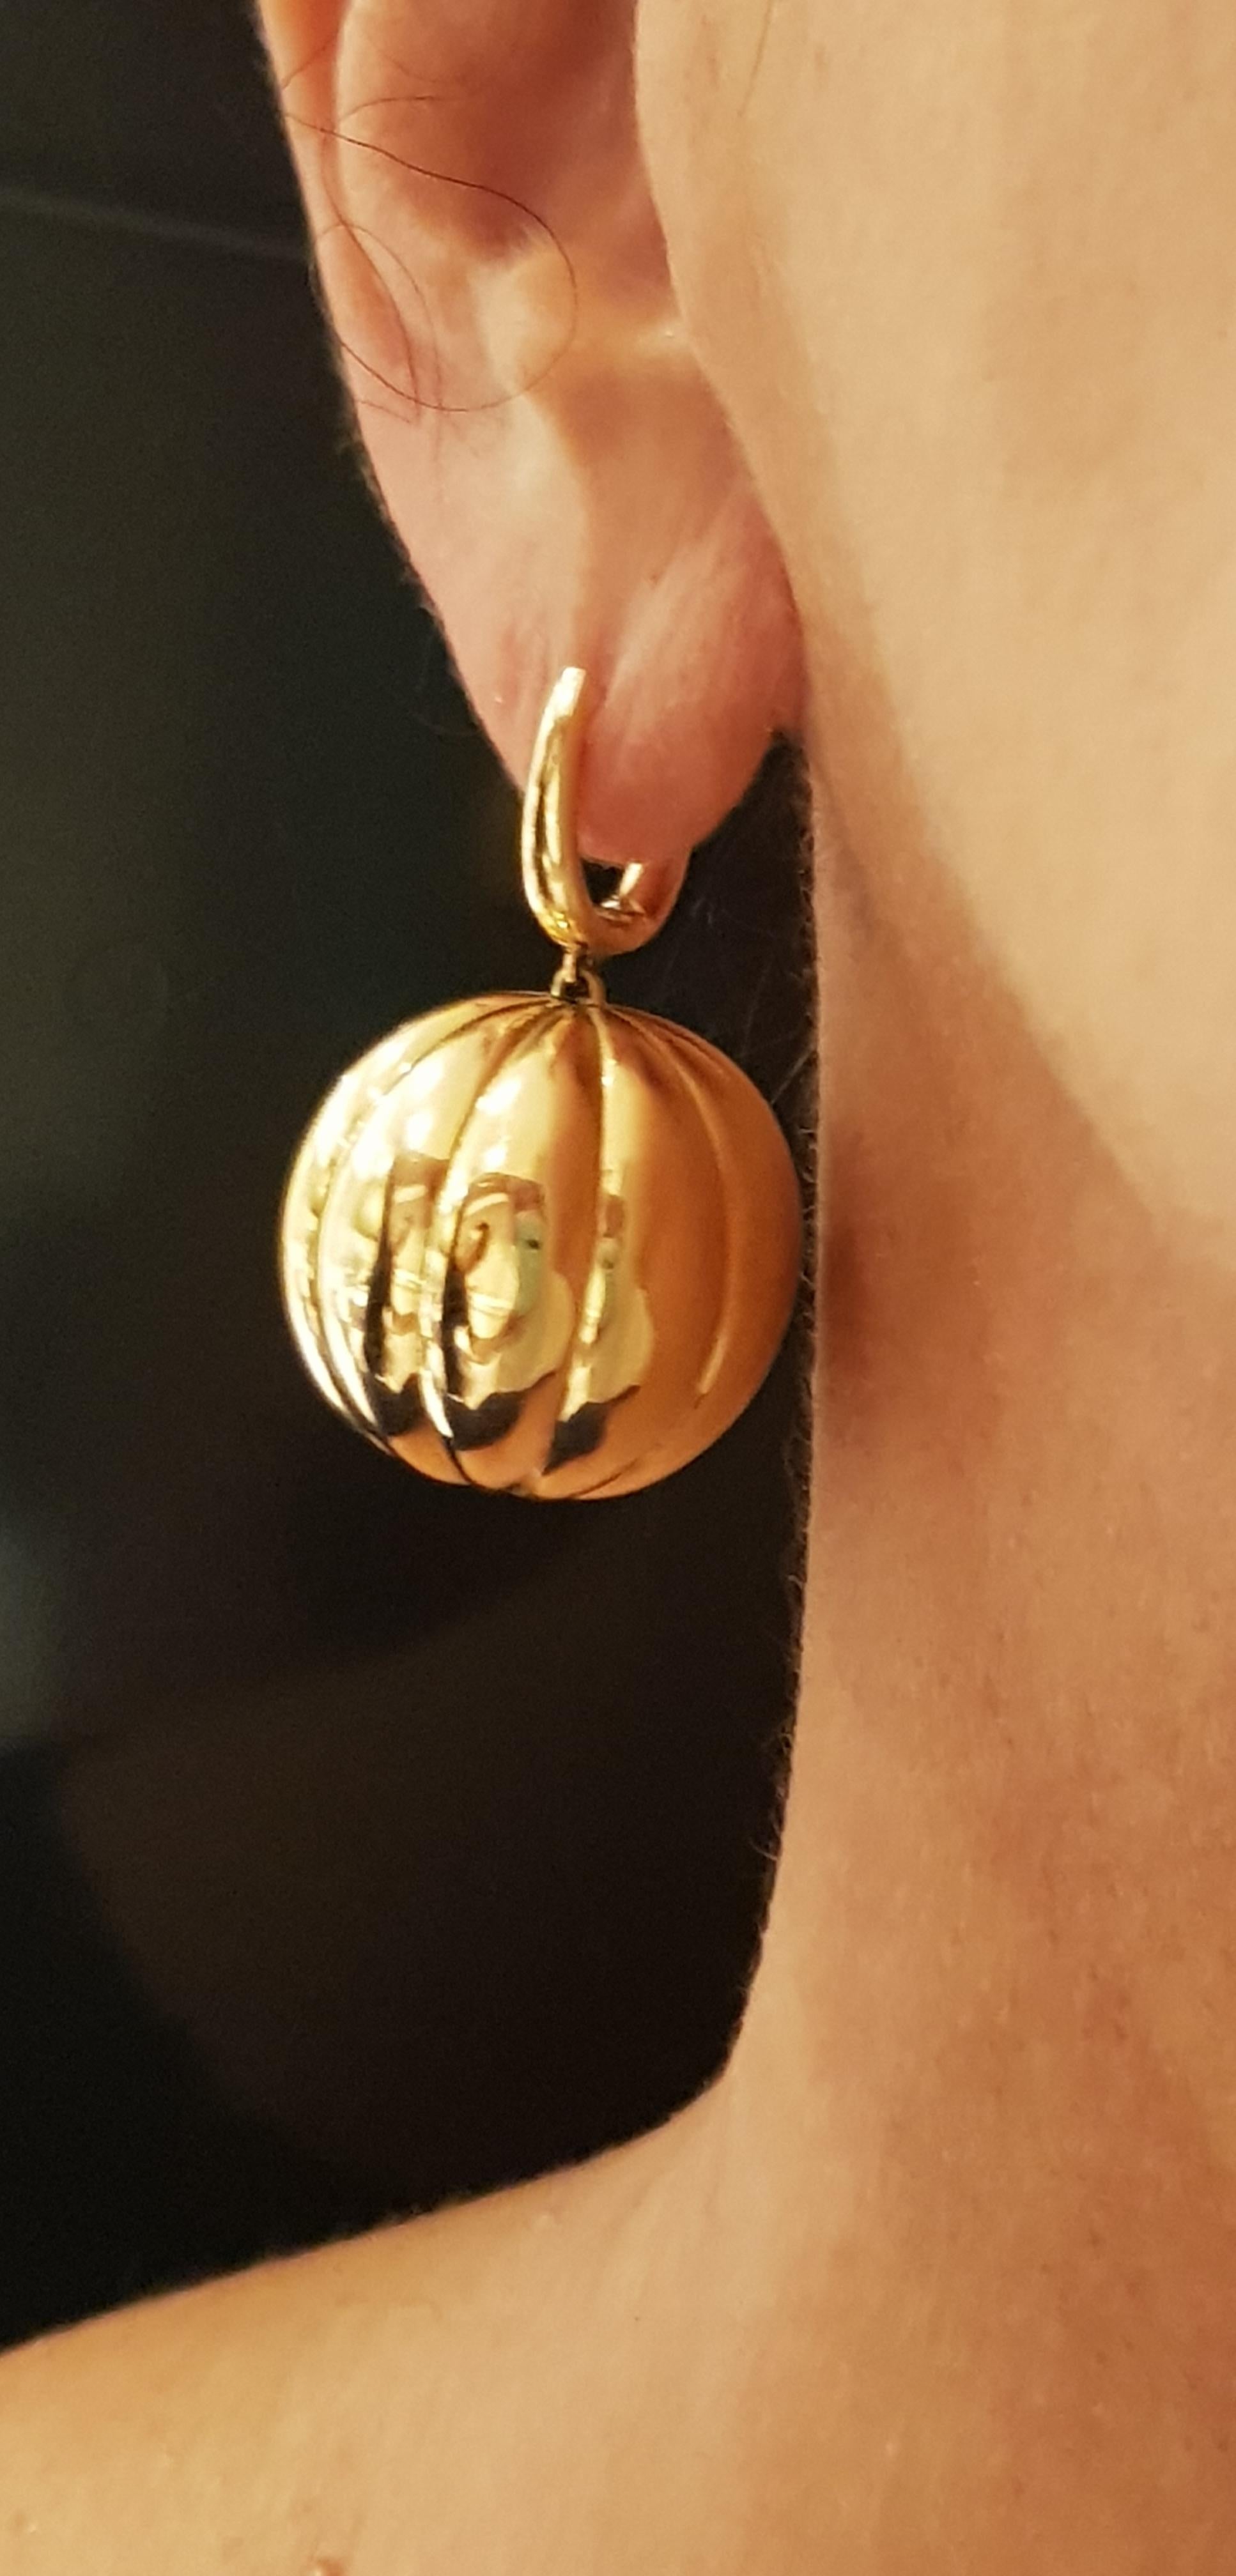 18 Carat Rose Gold Pumpkin Earrings 
Size Of Ball :23 mm, 20 mm, 17 mm 15 mm
You can order different colors and sizes upon request.